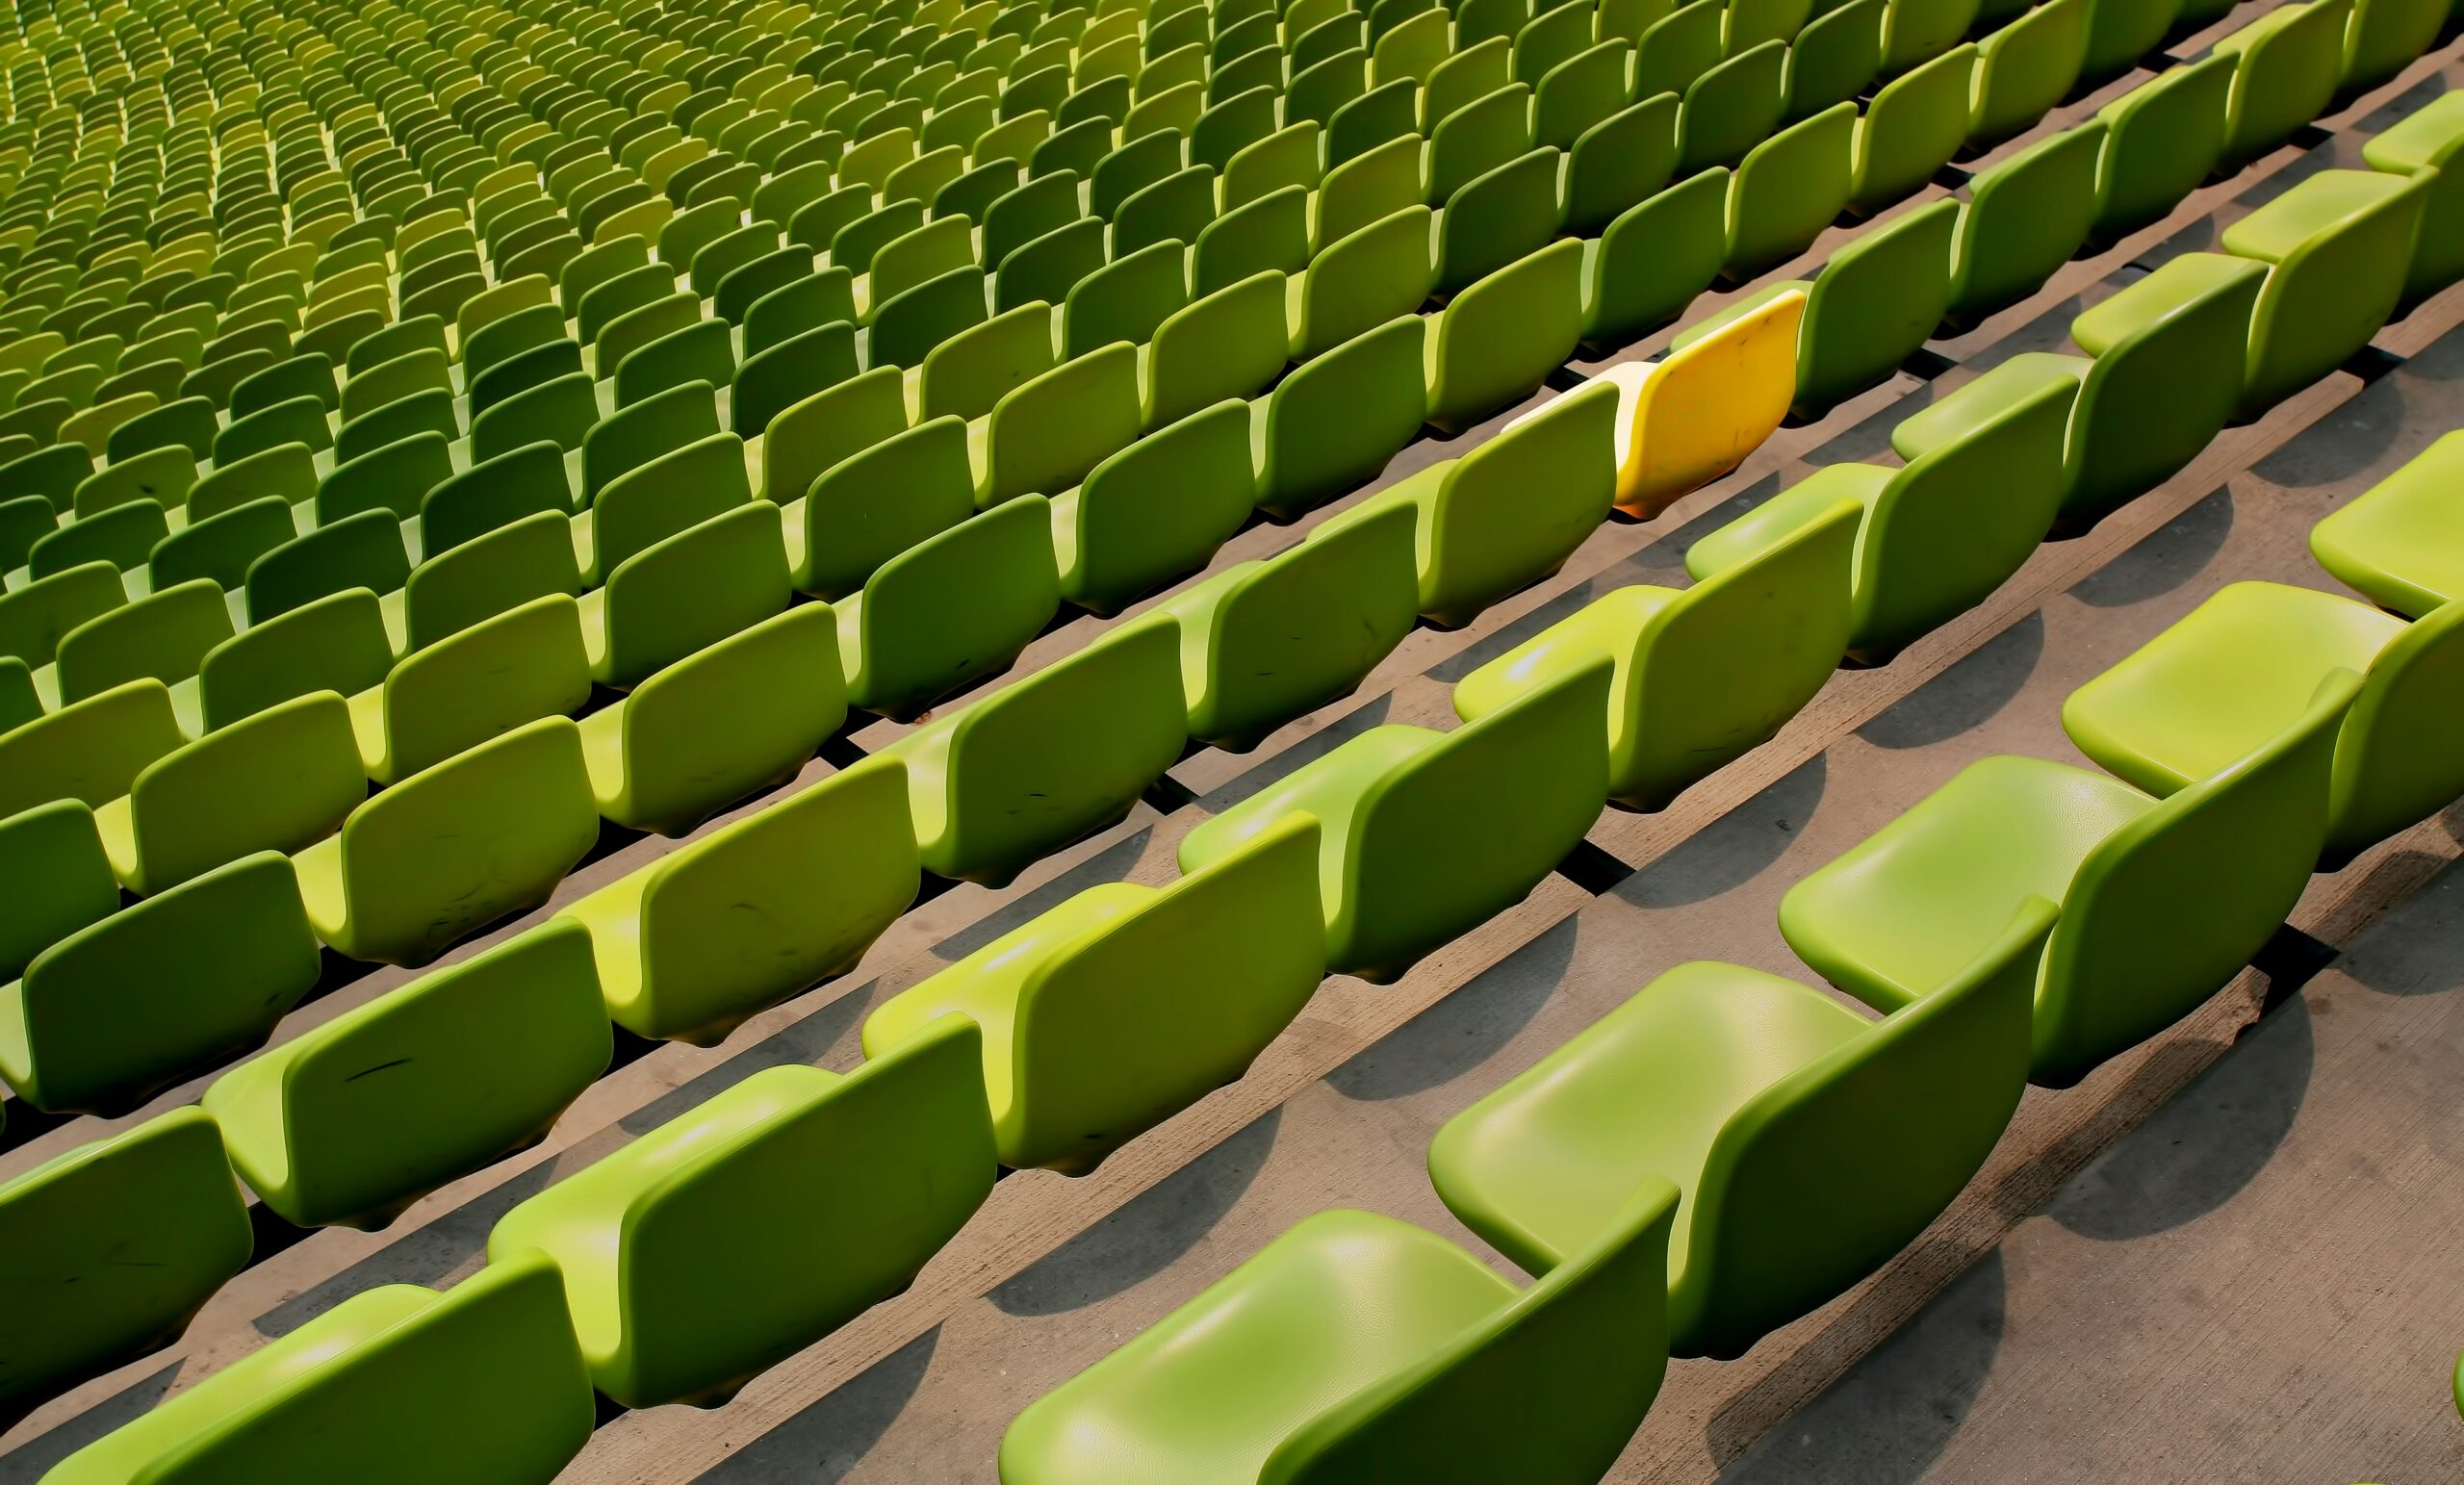 A row full of green chairs with one yellow chair